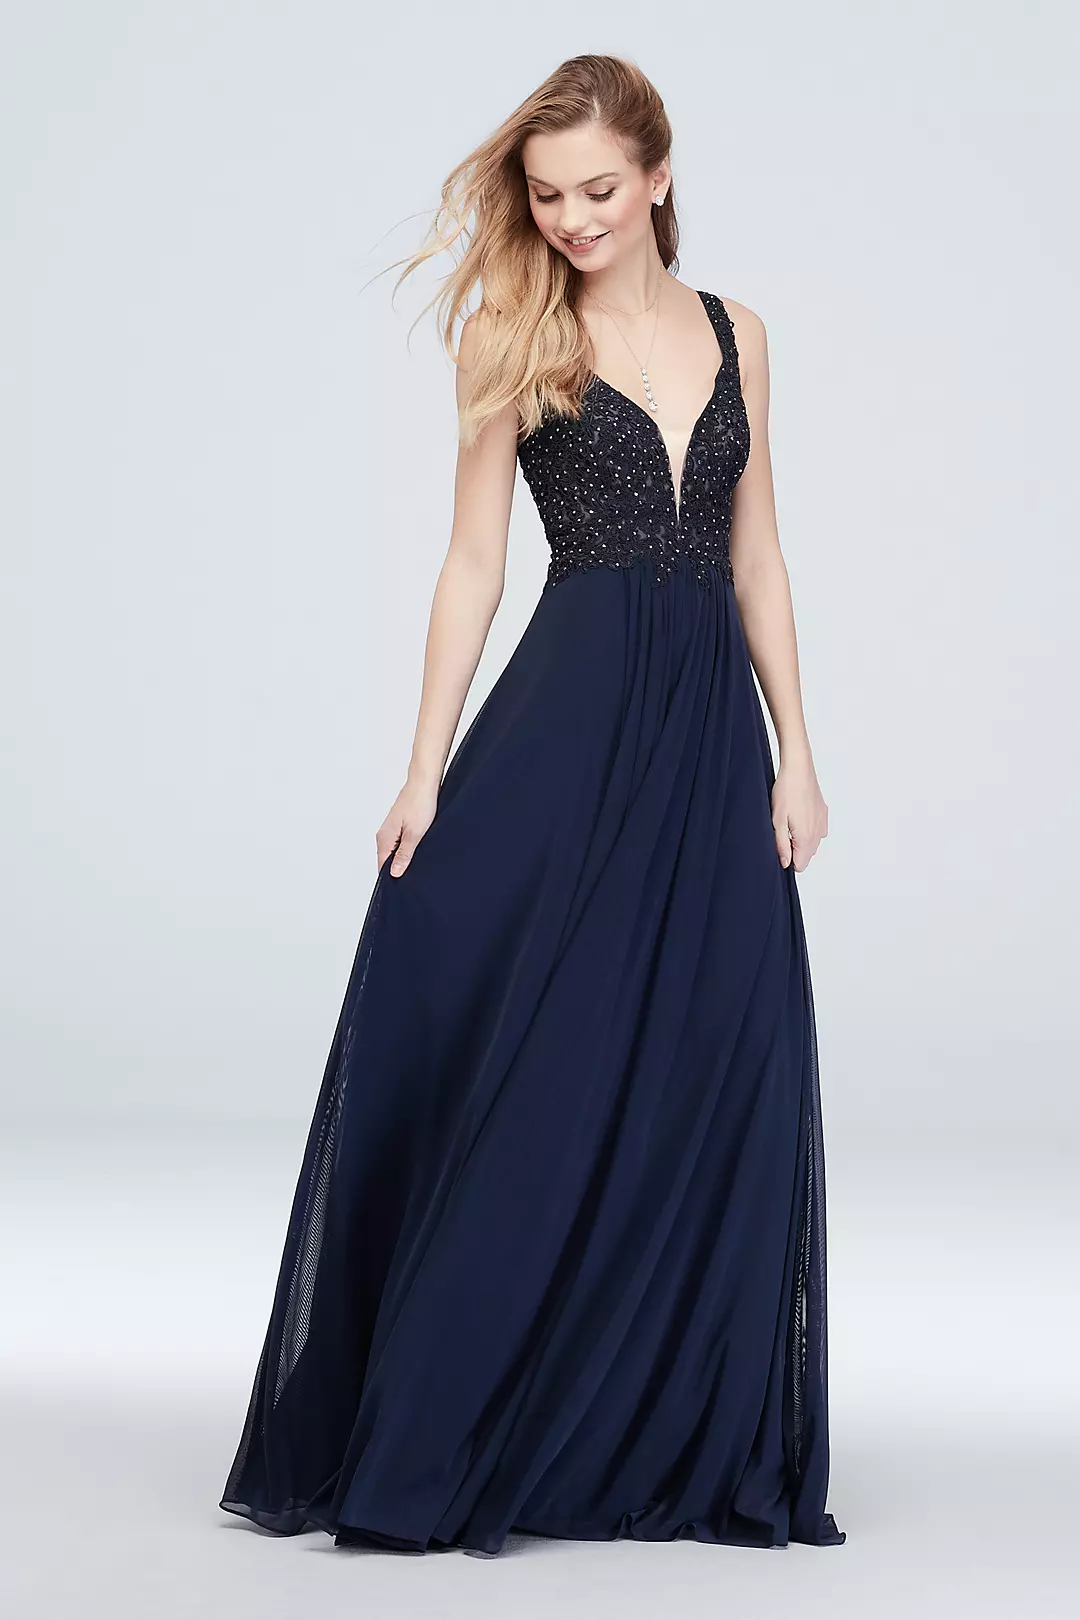 Plunging V Ball Gown with Gem and Applique Bodice Image